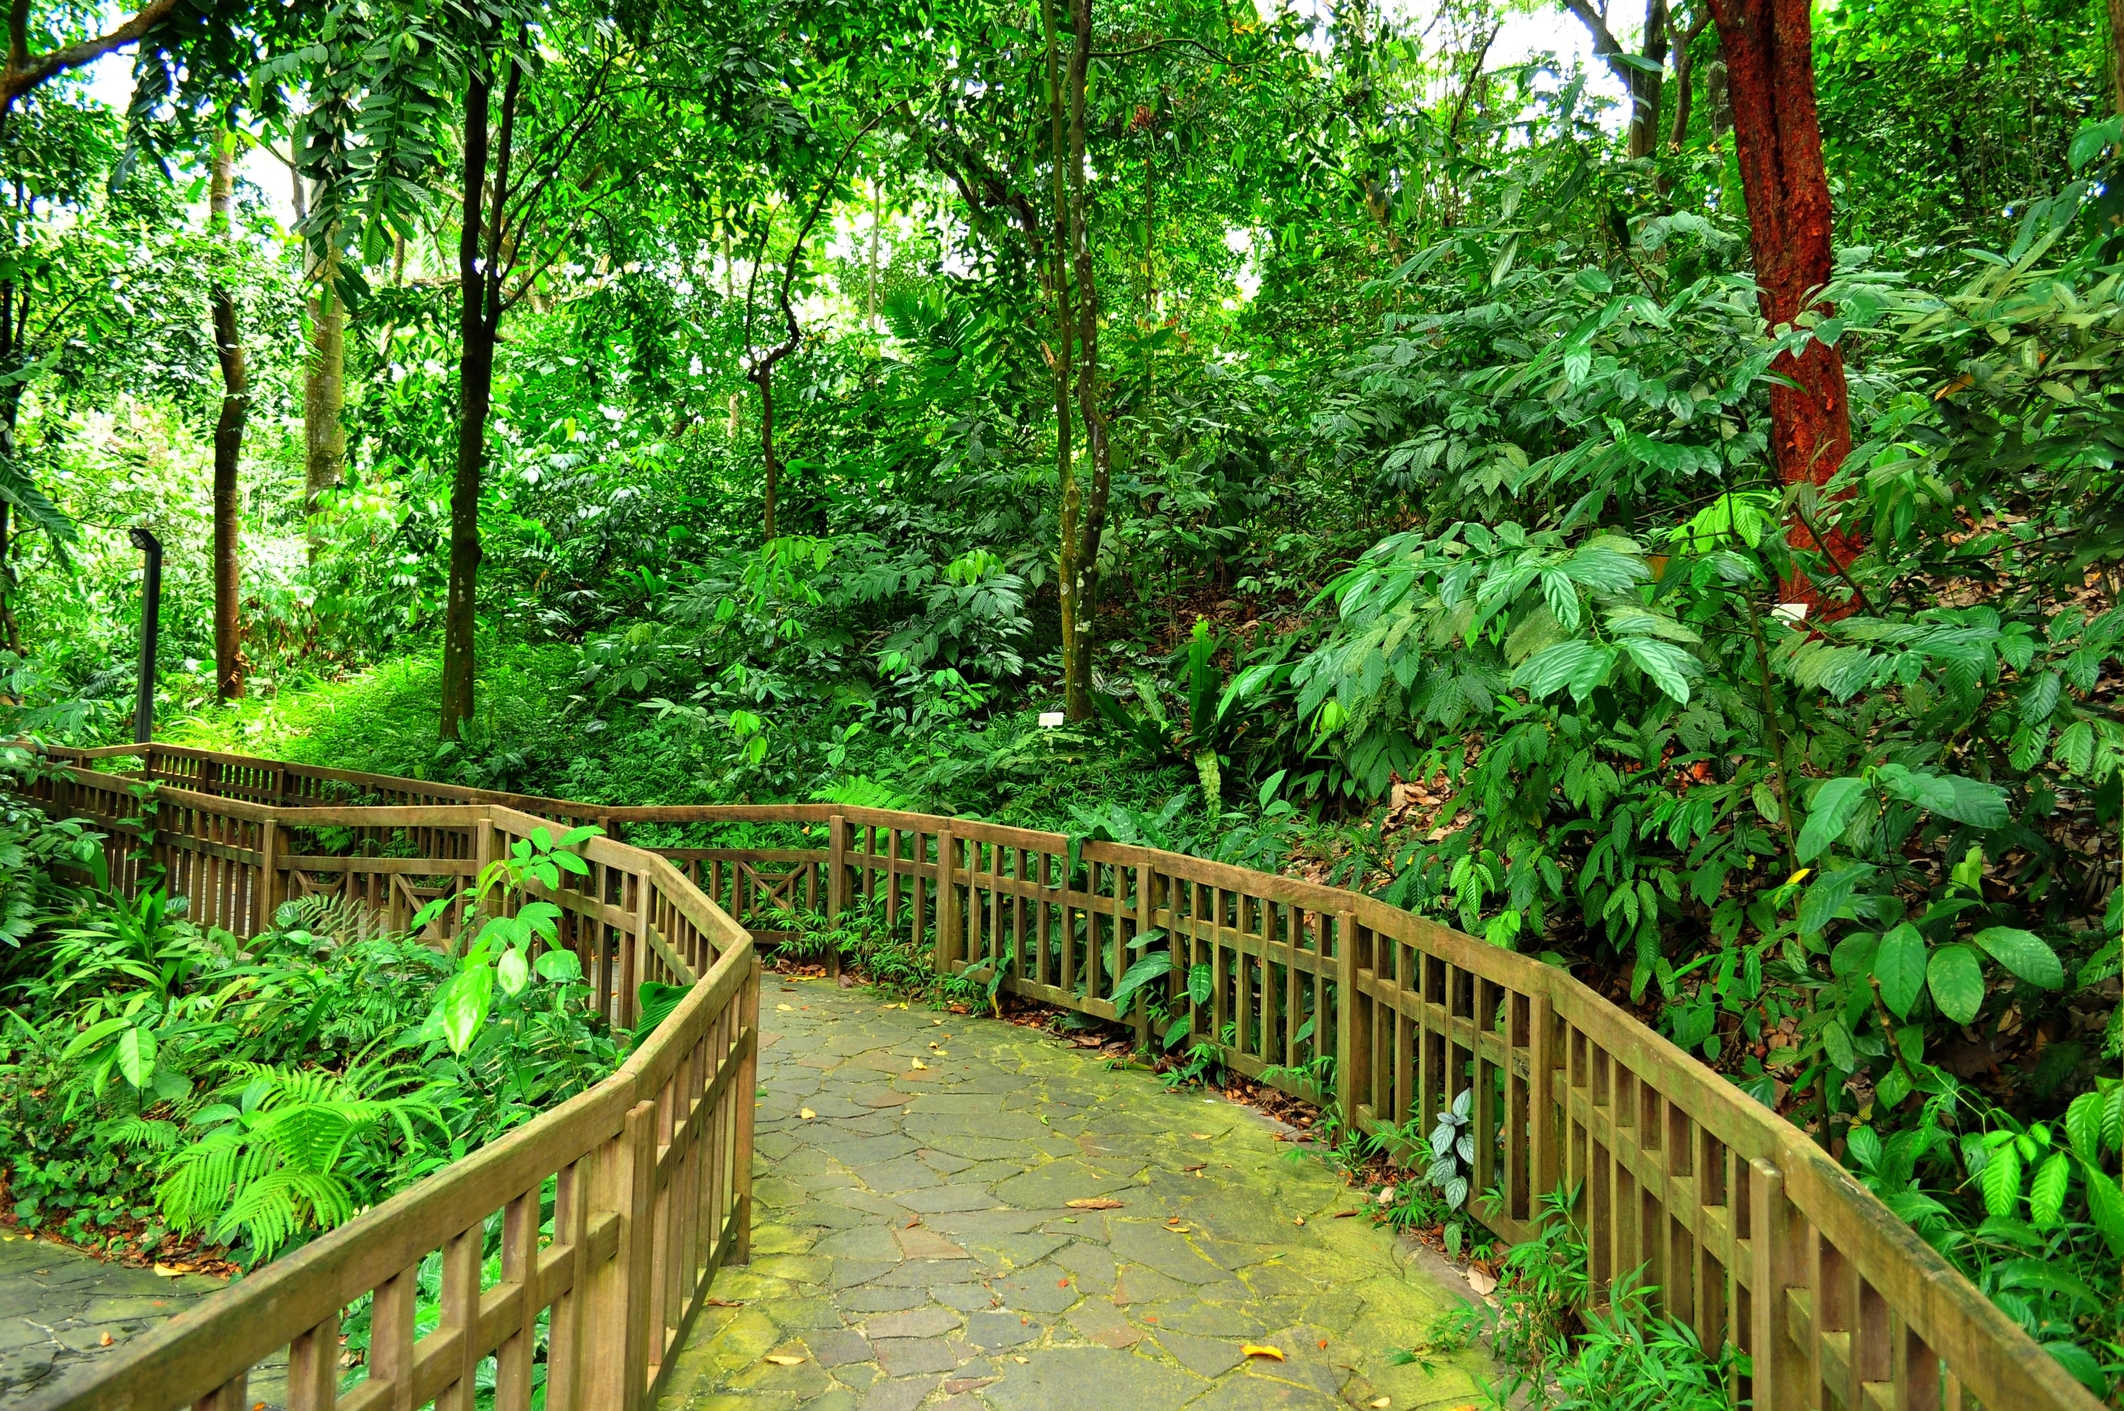 Nature walks are one of the more common family activities in Singapore enjoyed by most residents.